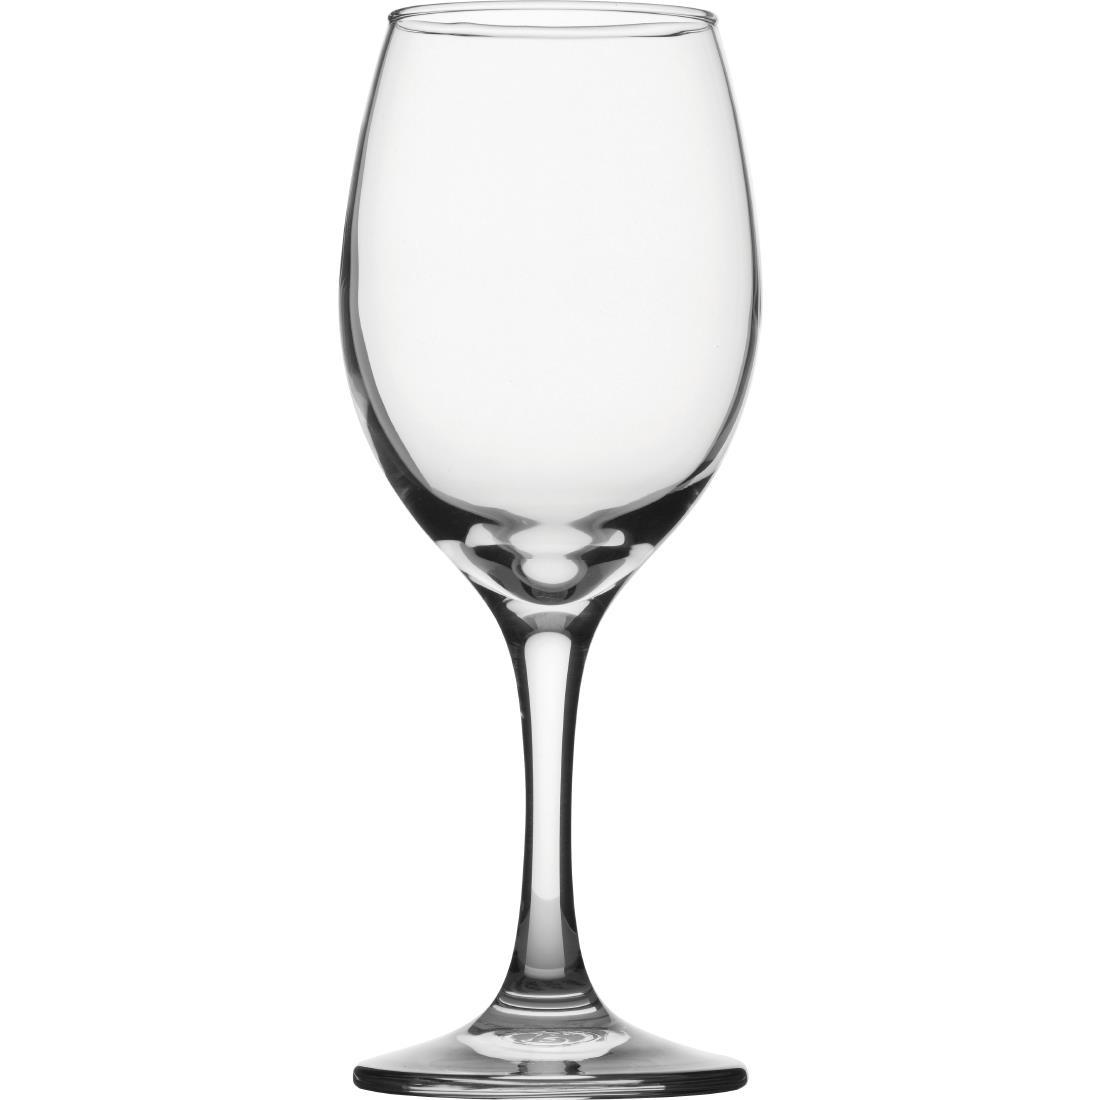 Utopia Maldive Wine Goblets 310ml CE Marked at 250ml (Pack of 12) - DY264  - 1